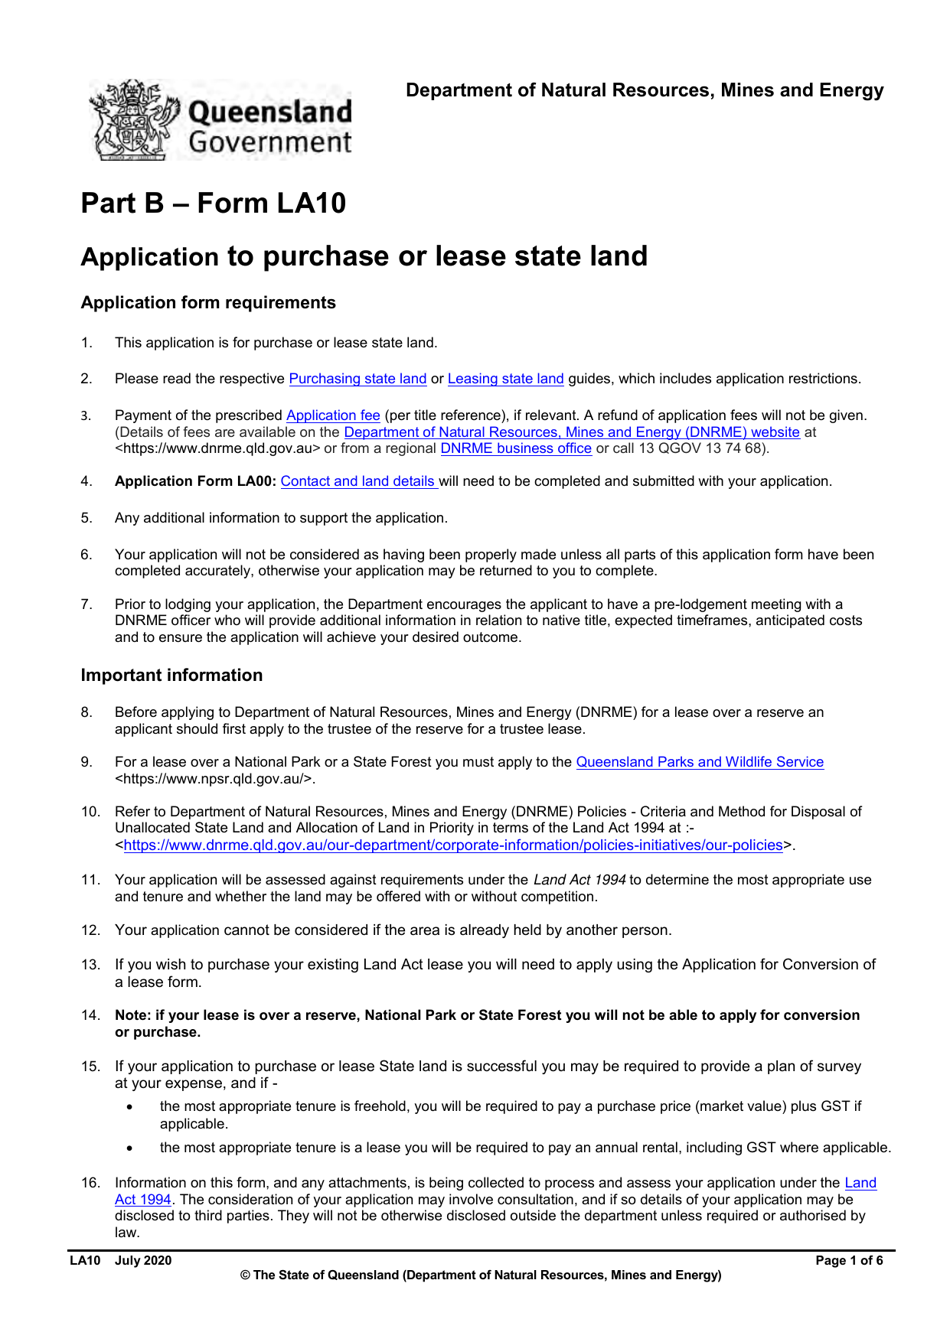 Form LA10 Part B Application to Purchase or Lease State Land - Queensland, Australia, Page 1